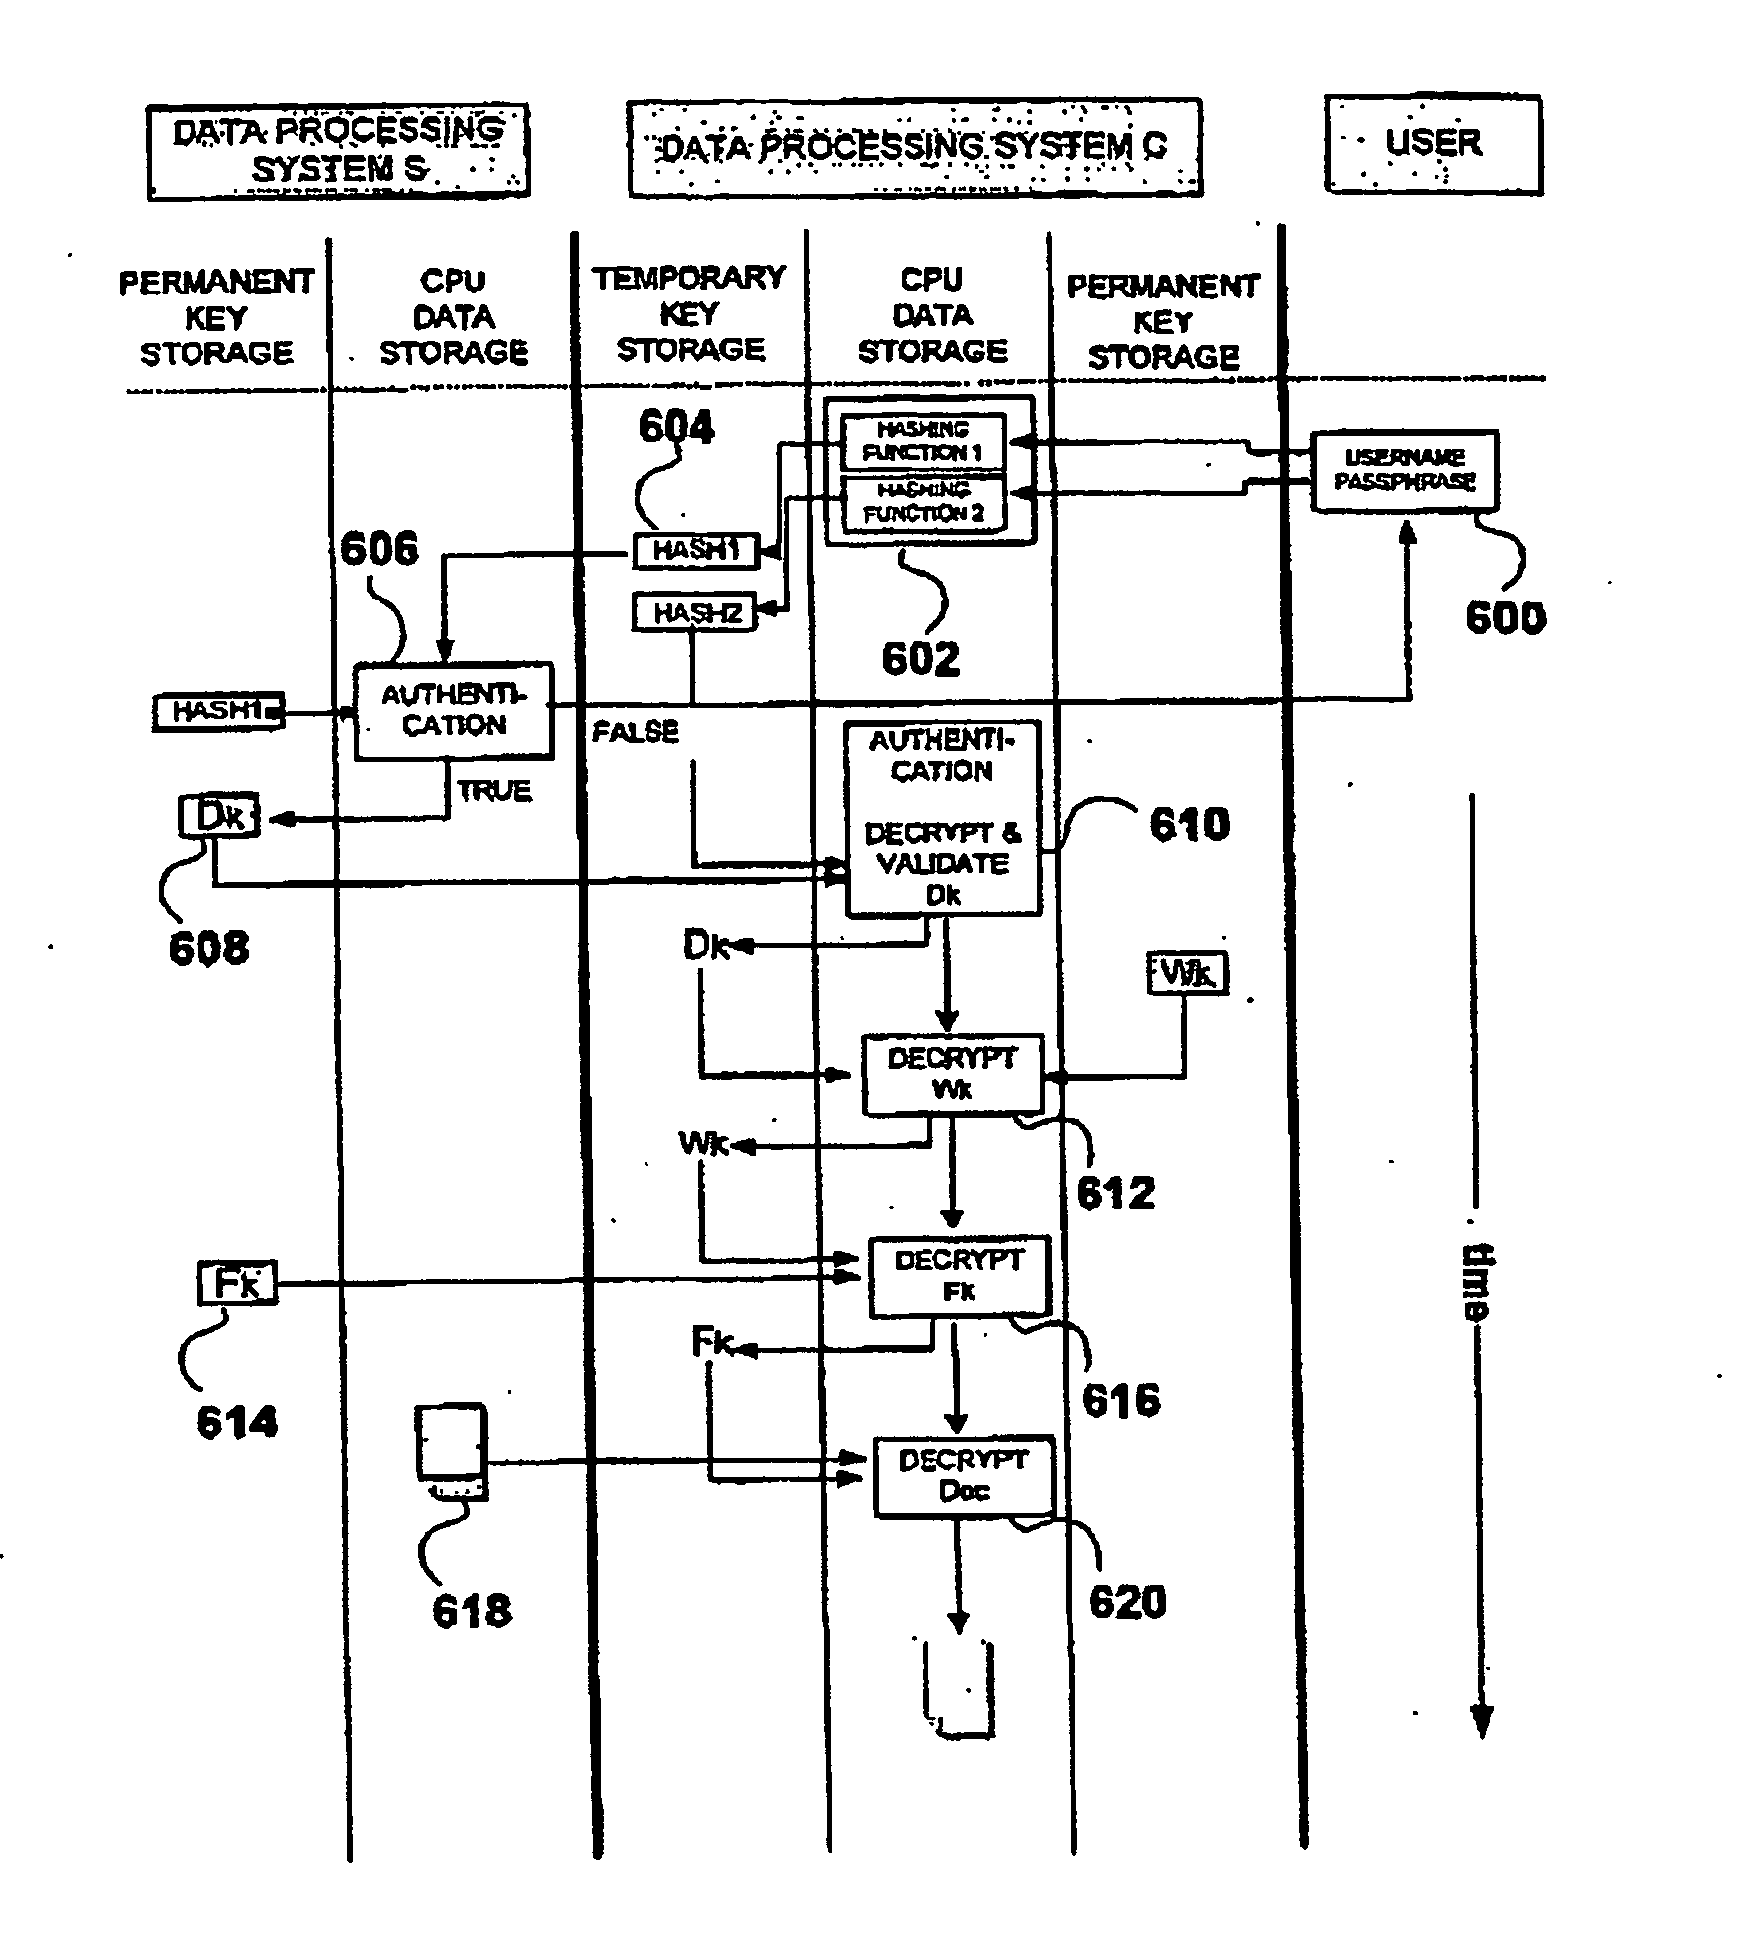 Method and system for authentication, data communication, storage and retrieval in a distributed key cryptography system